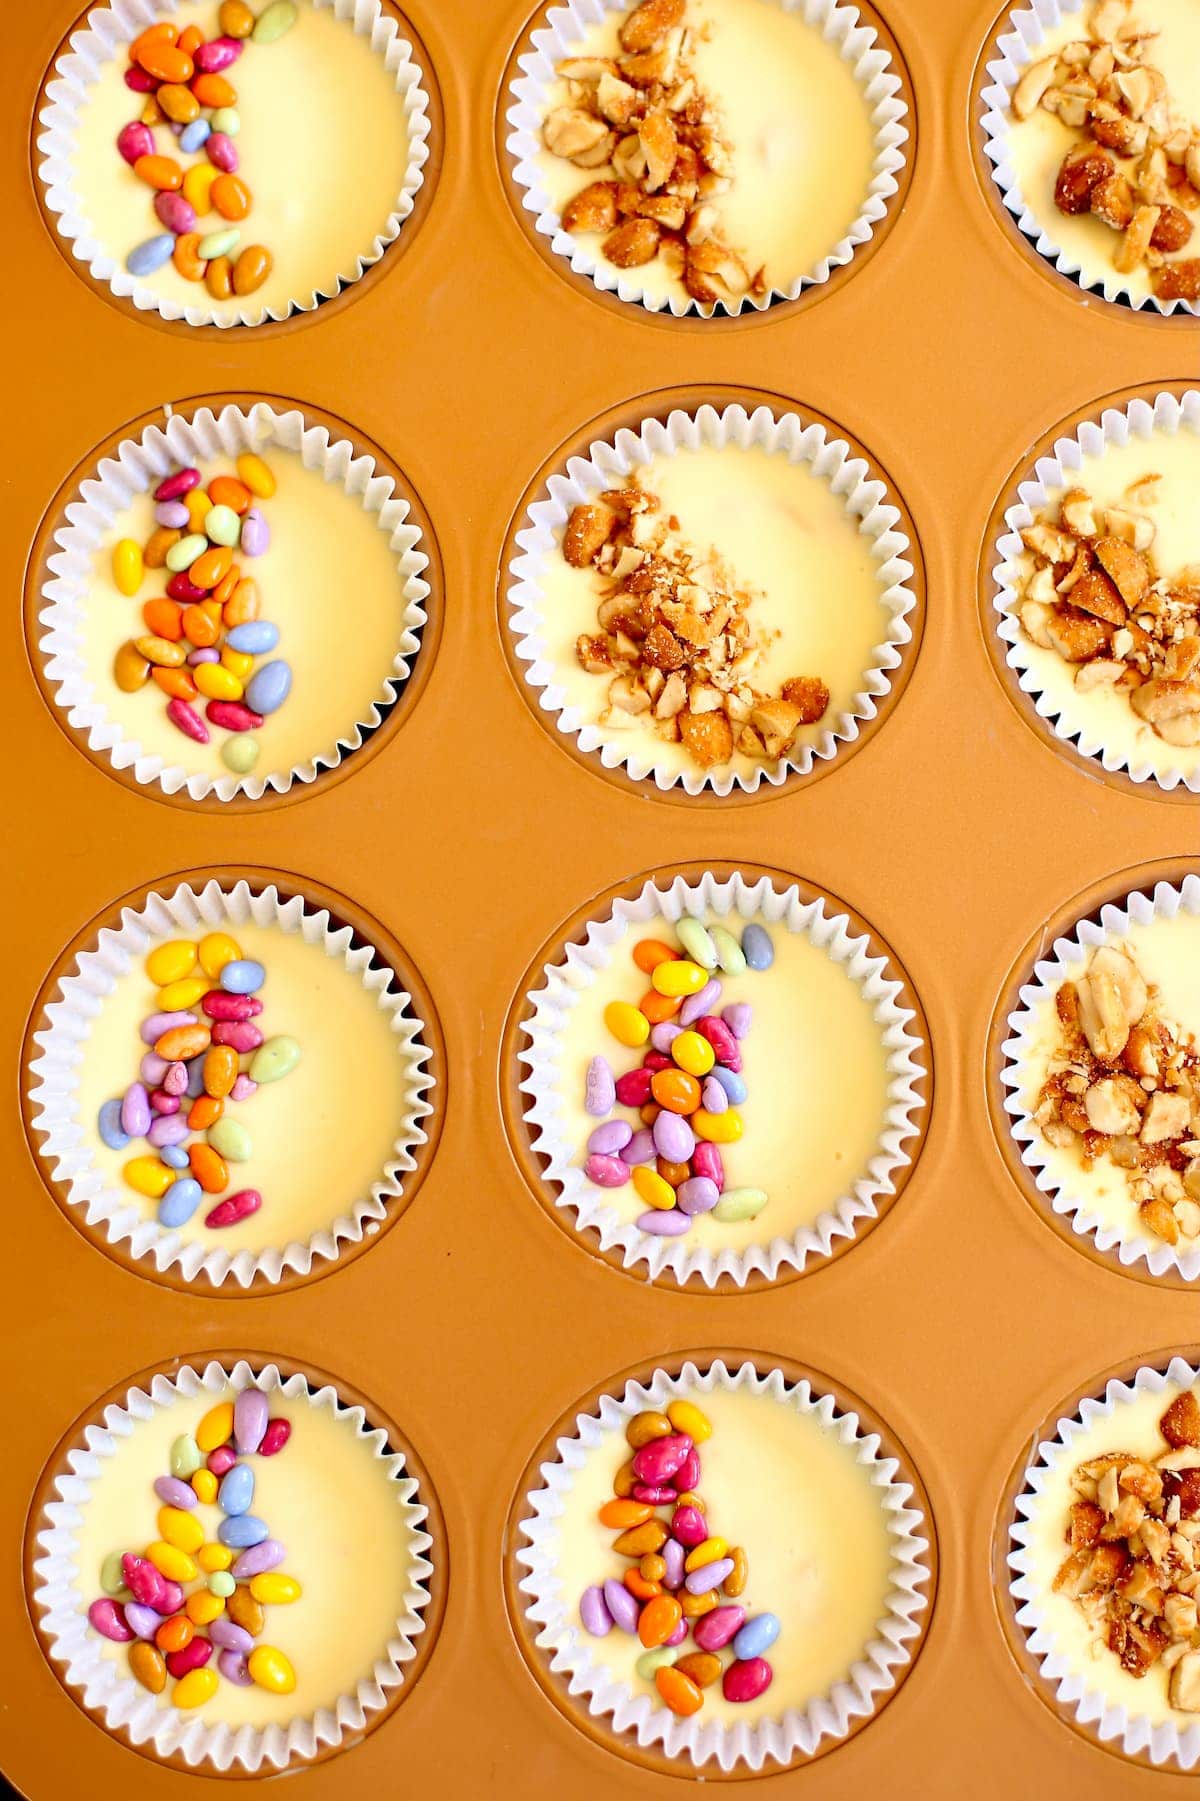 cups of white chocolate peanut butter cups with different toppings on them.